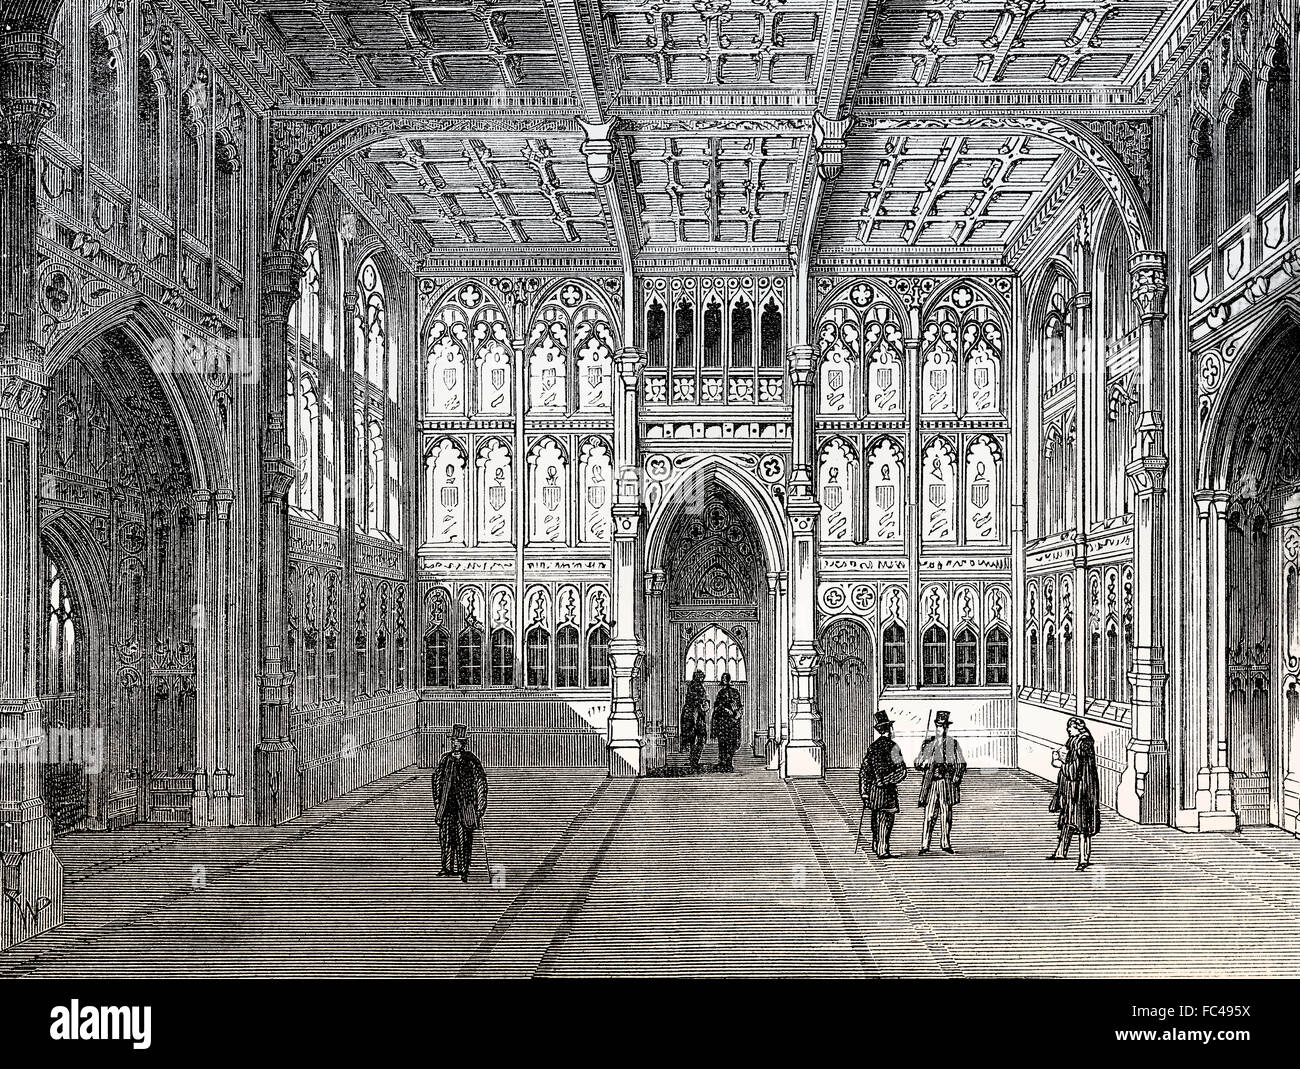 The Lobby of the House of Commons, 19th century, London, England Stock Photo